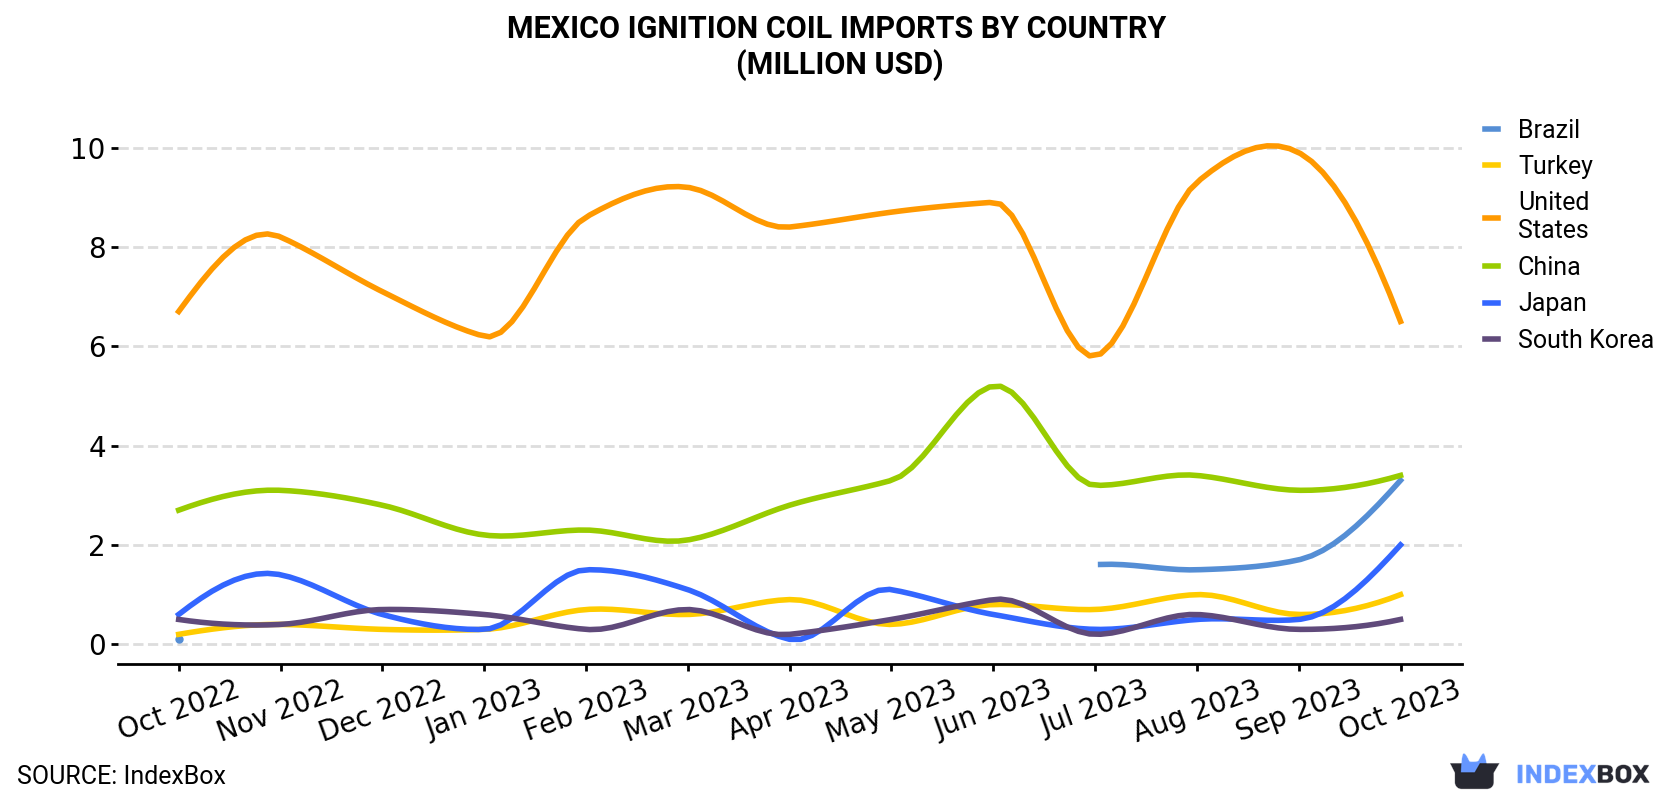 Mexico Ignition Coil Imports By Country (Million USD)